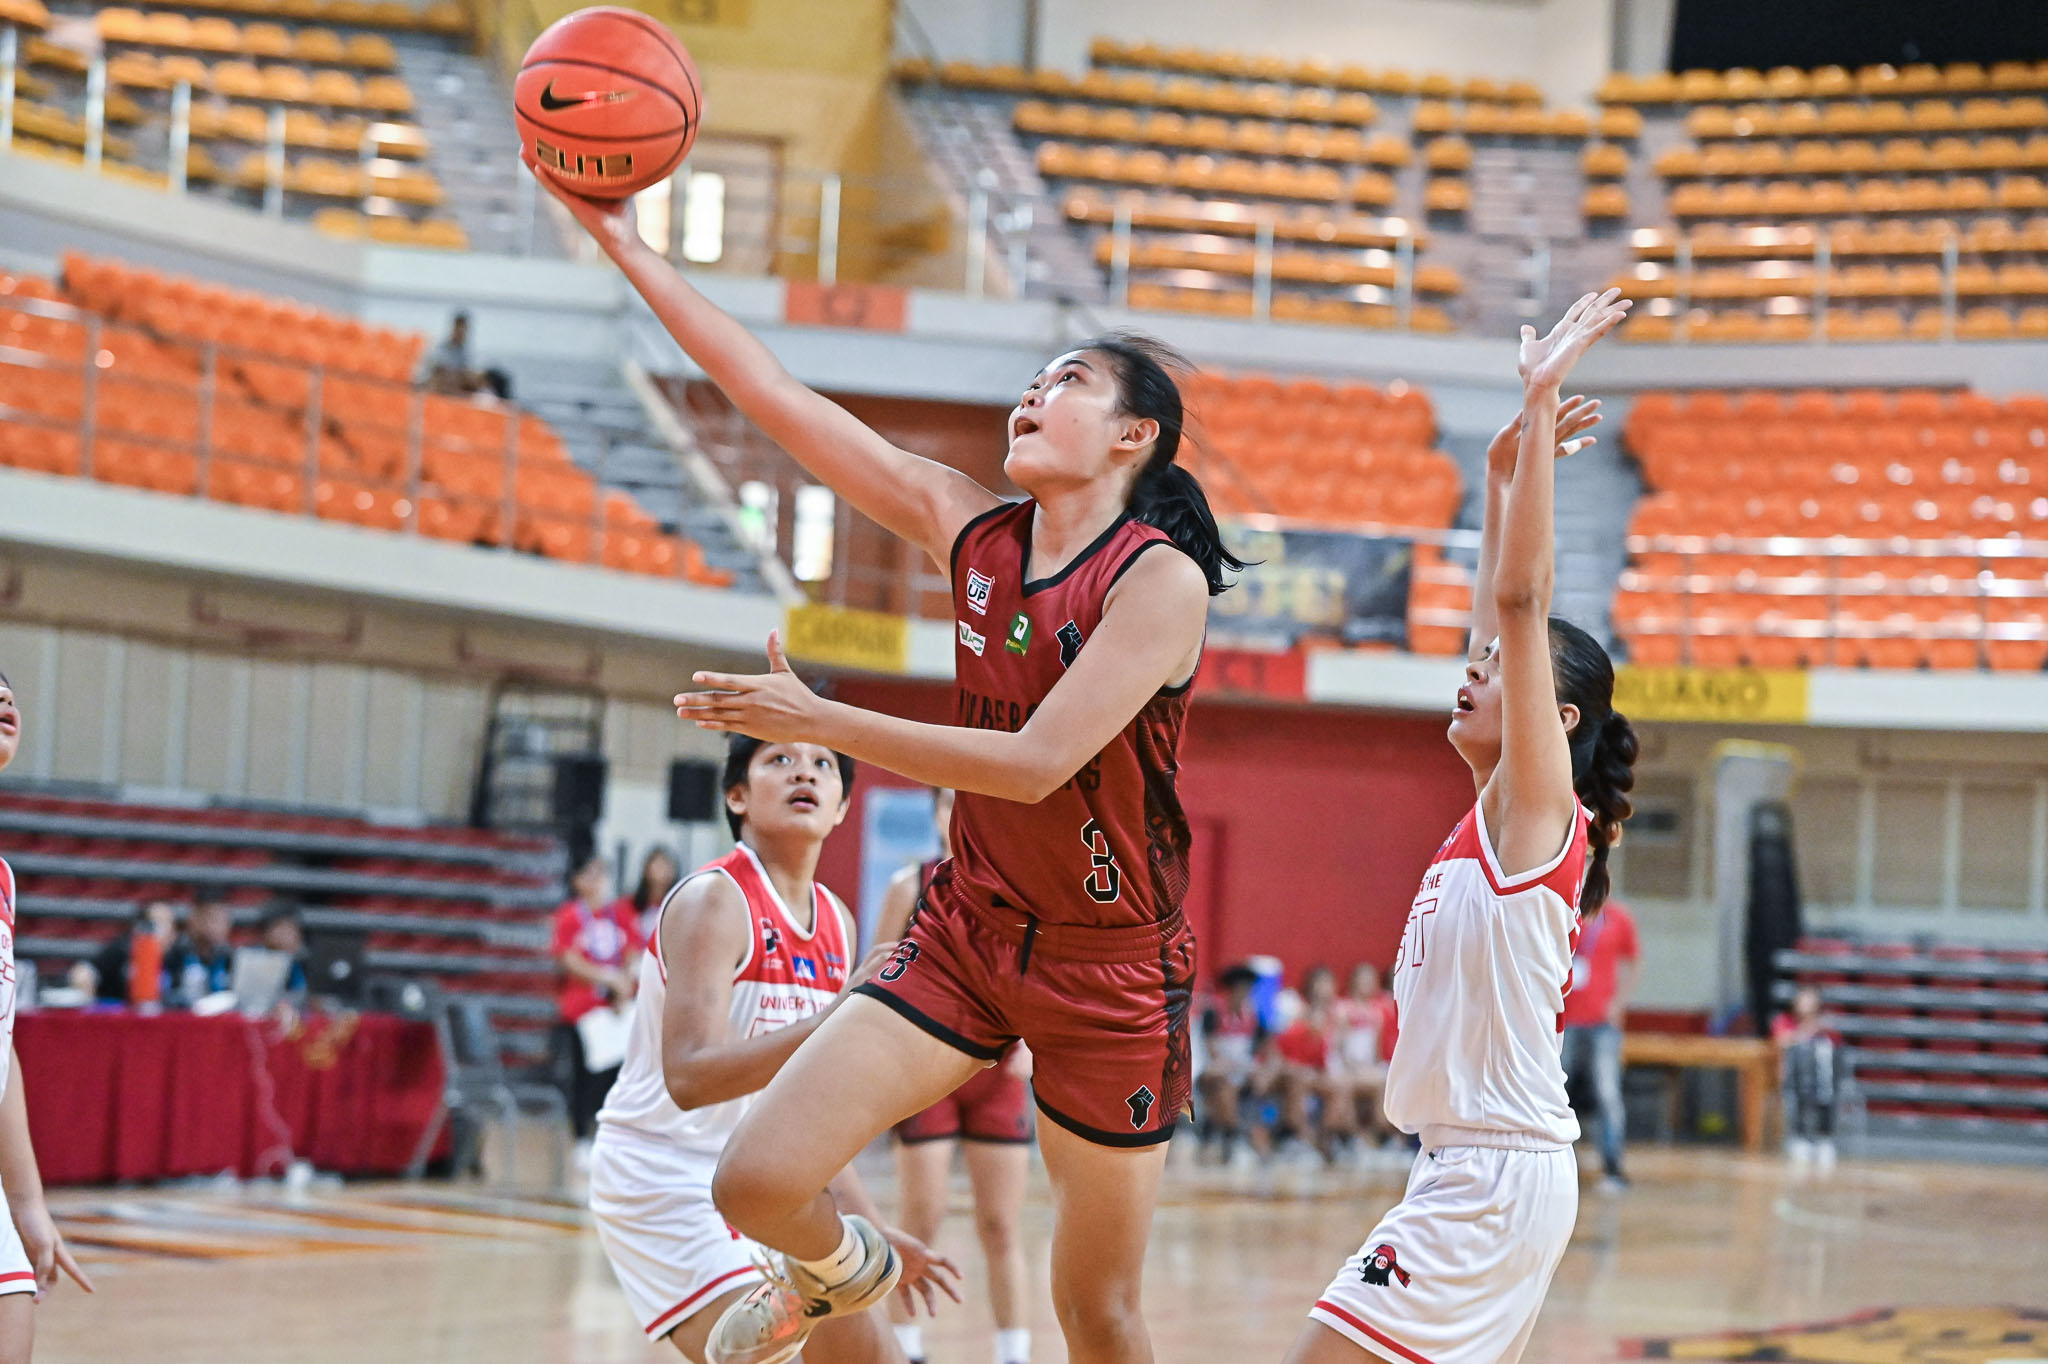 UP drubs UE to hang tight on playoffs spot